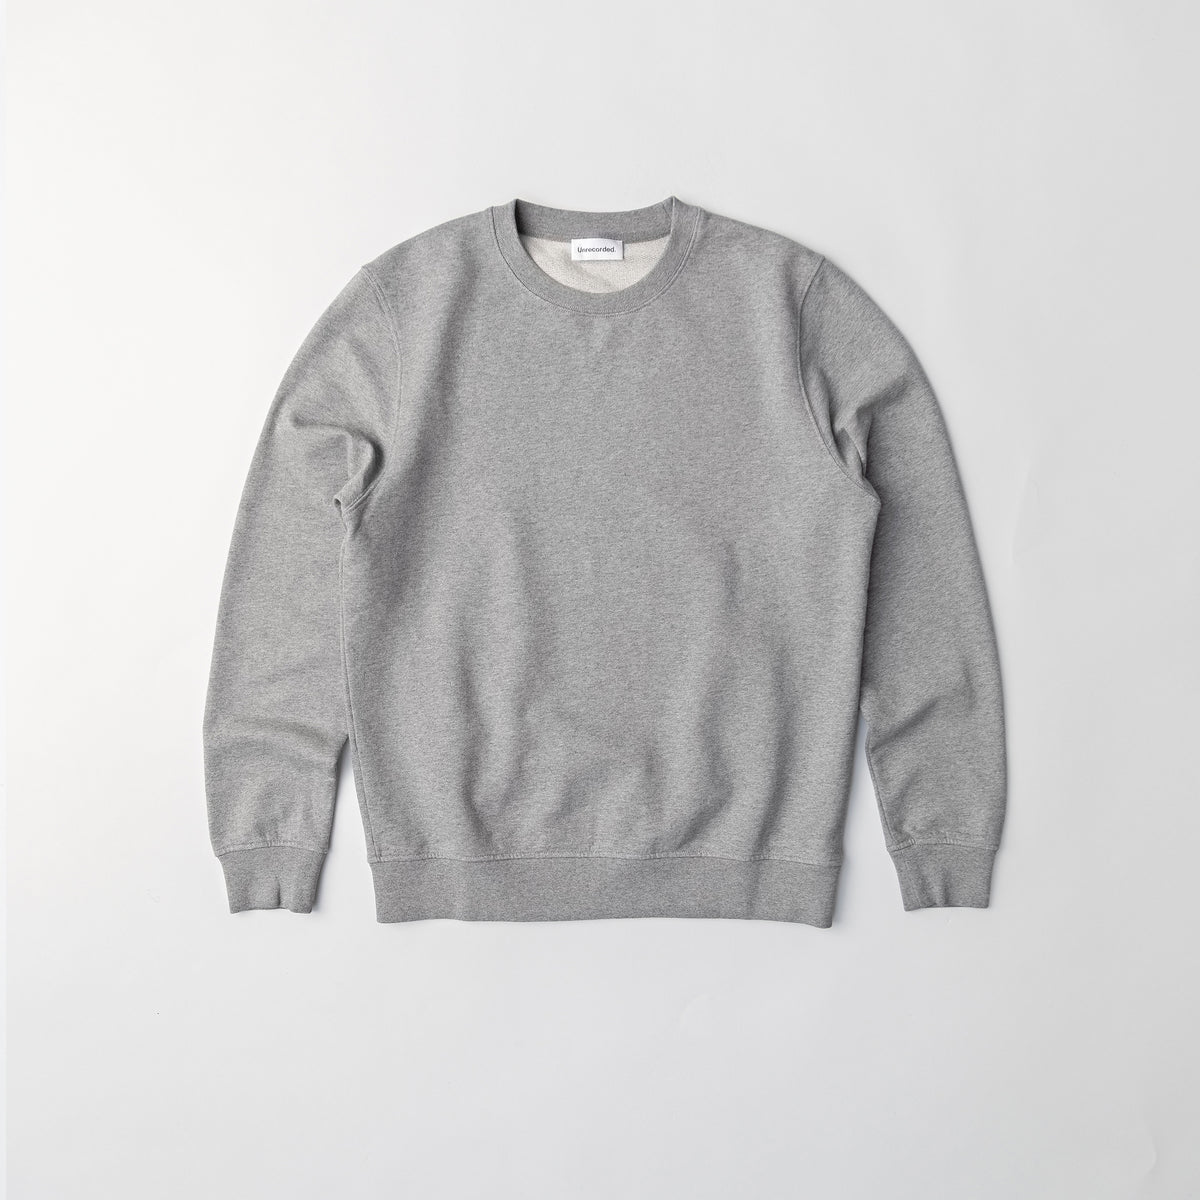 Sweater Grey made from Organic Cotton - Unrecorded - Front Women - Front Men